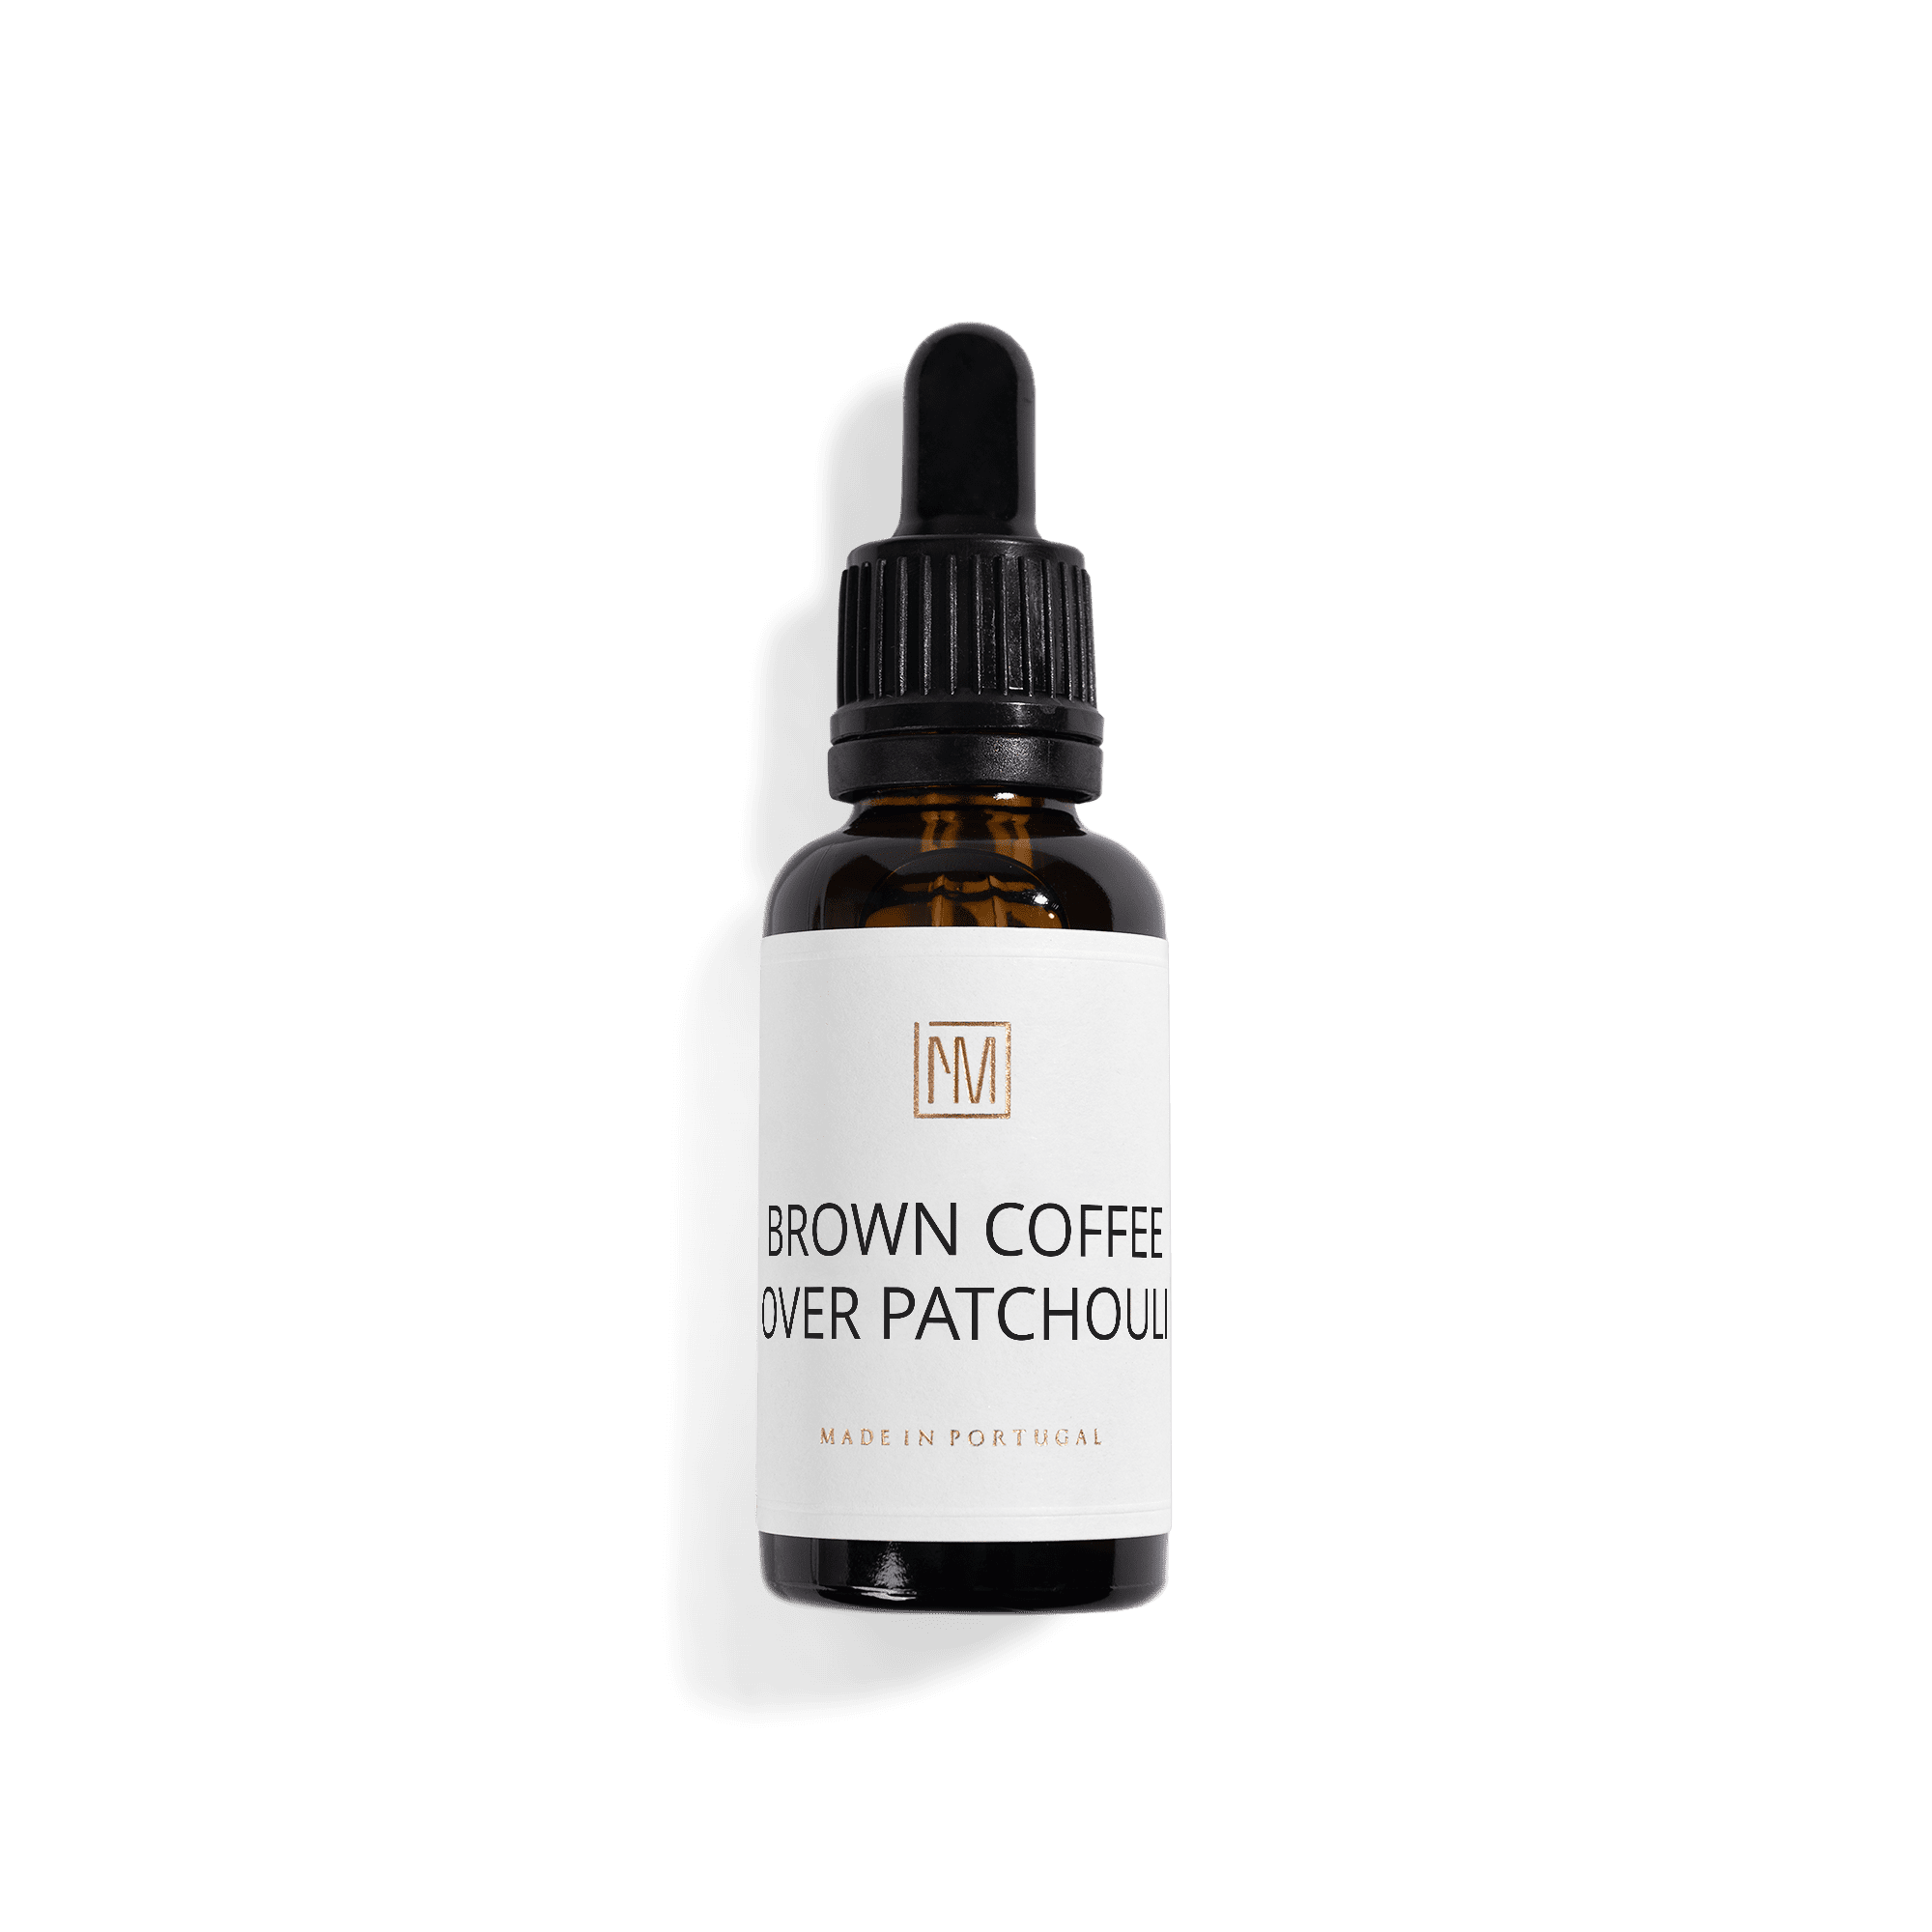 Brown Coffee over Patchouli Fragrance